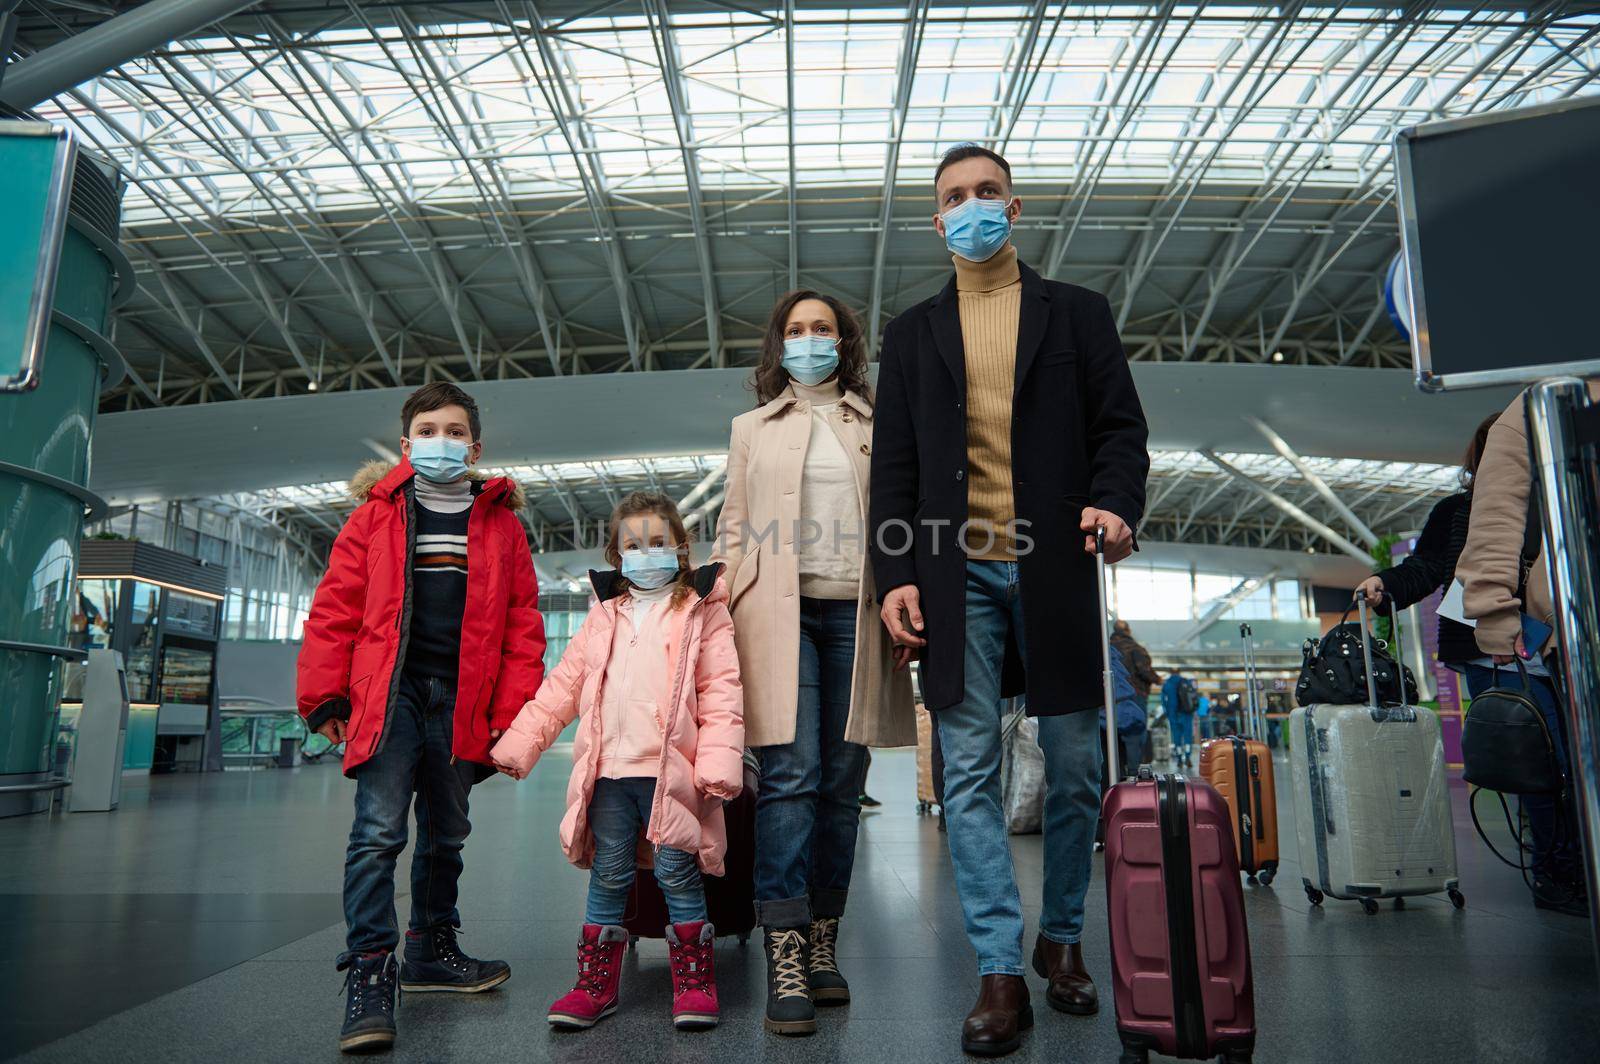 Portrait of a young family wearing protective medical masks traveling during a pandemic, standing with luggage and suitcase at the airport while waiting to check in for a flight. Air travel concept by artgf